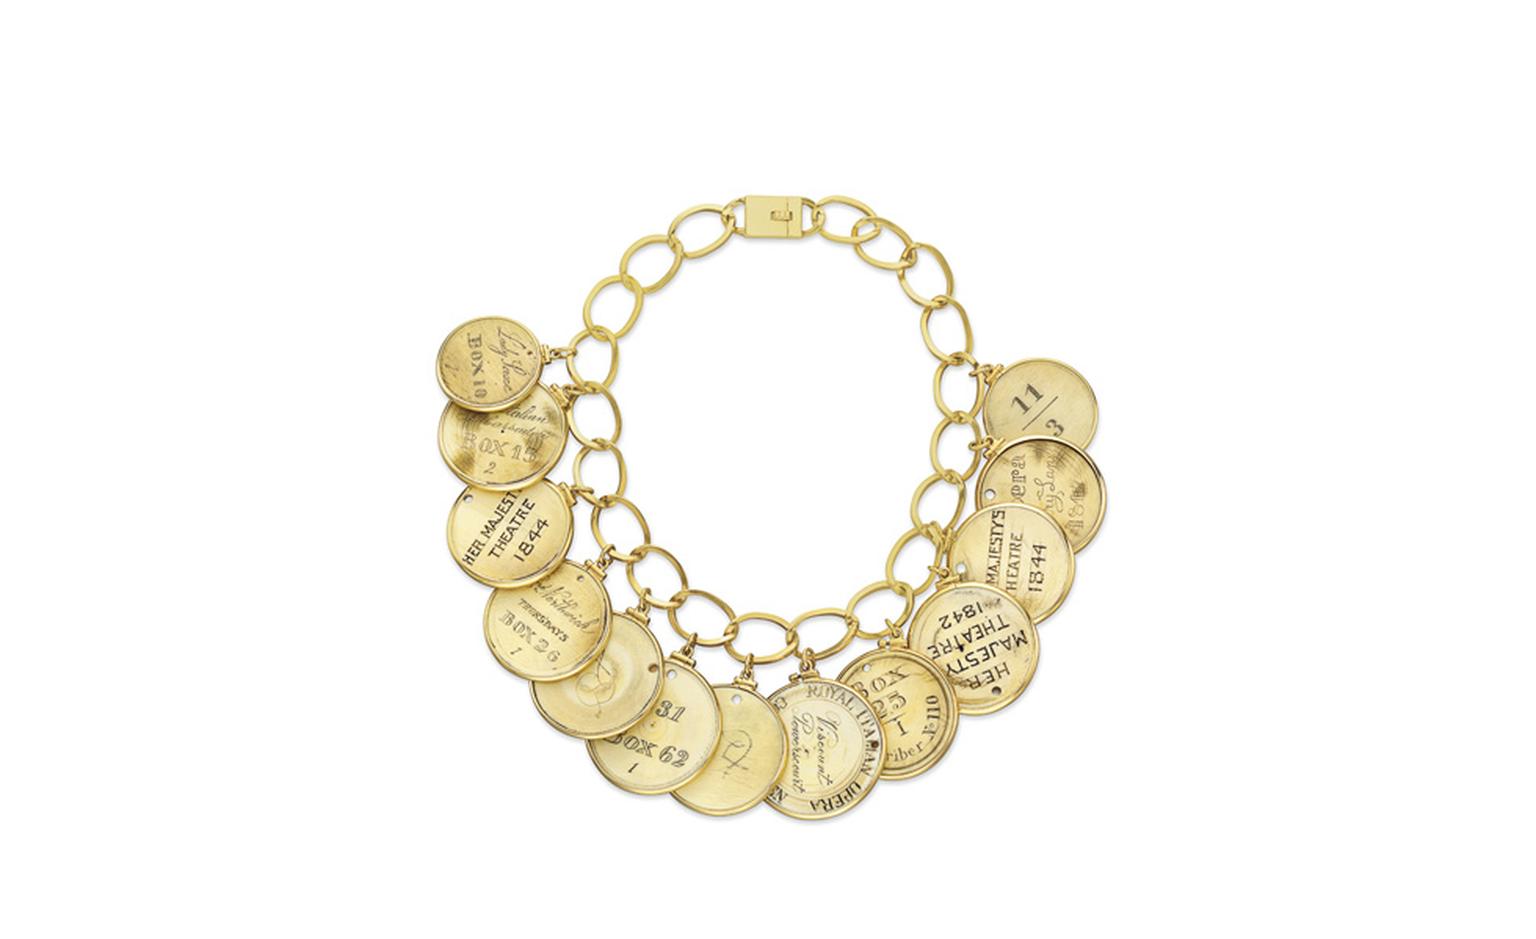 A Gold Necklace with ivory opera passes, circa 18th and 19th centuries. Fashioned from ivory theatre tokens, this one-of-a-kind necklace was owned by the Hollywood costume designer Edith Head Estimate: $1,500 – 2,000